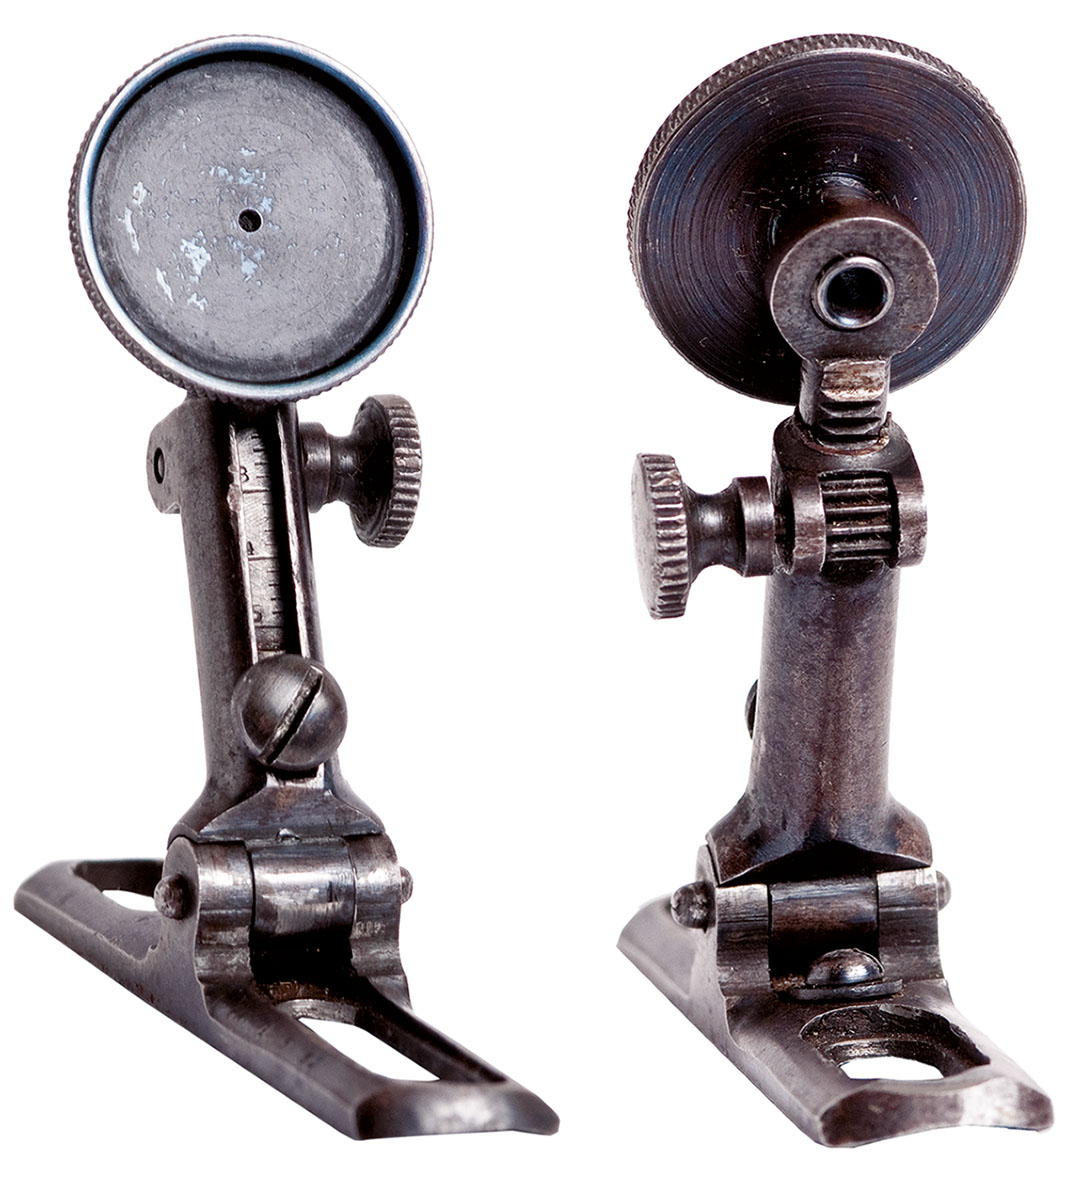 Carver’s Patent Excelsior Rack and Pinion Tang Sight. Note the clever use of the rack and pinion to adjust elevation.